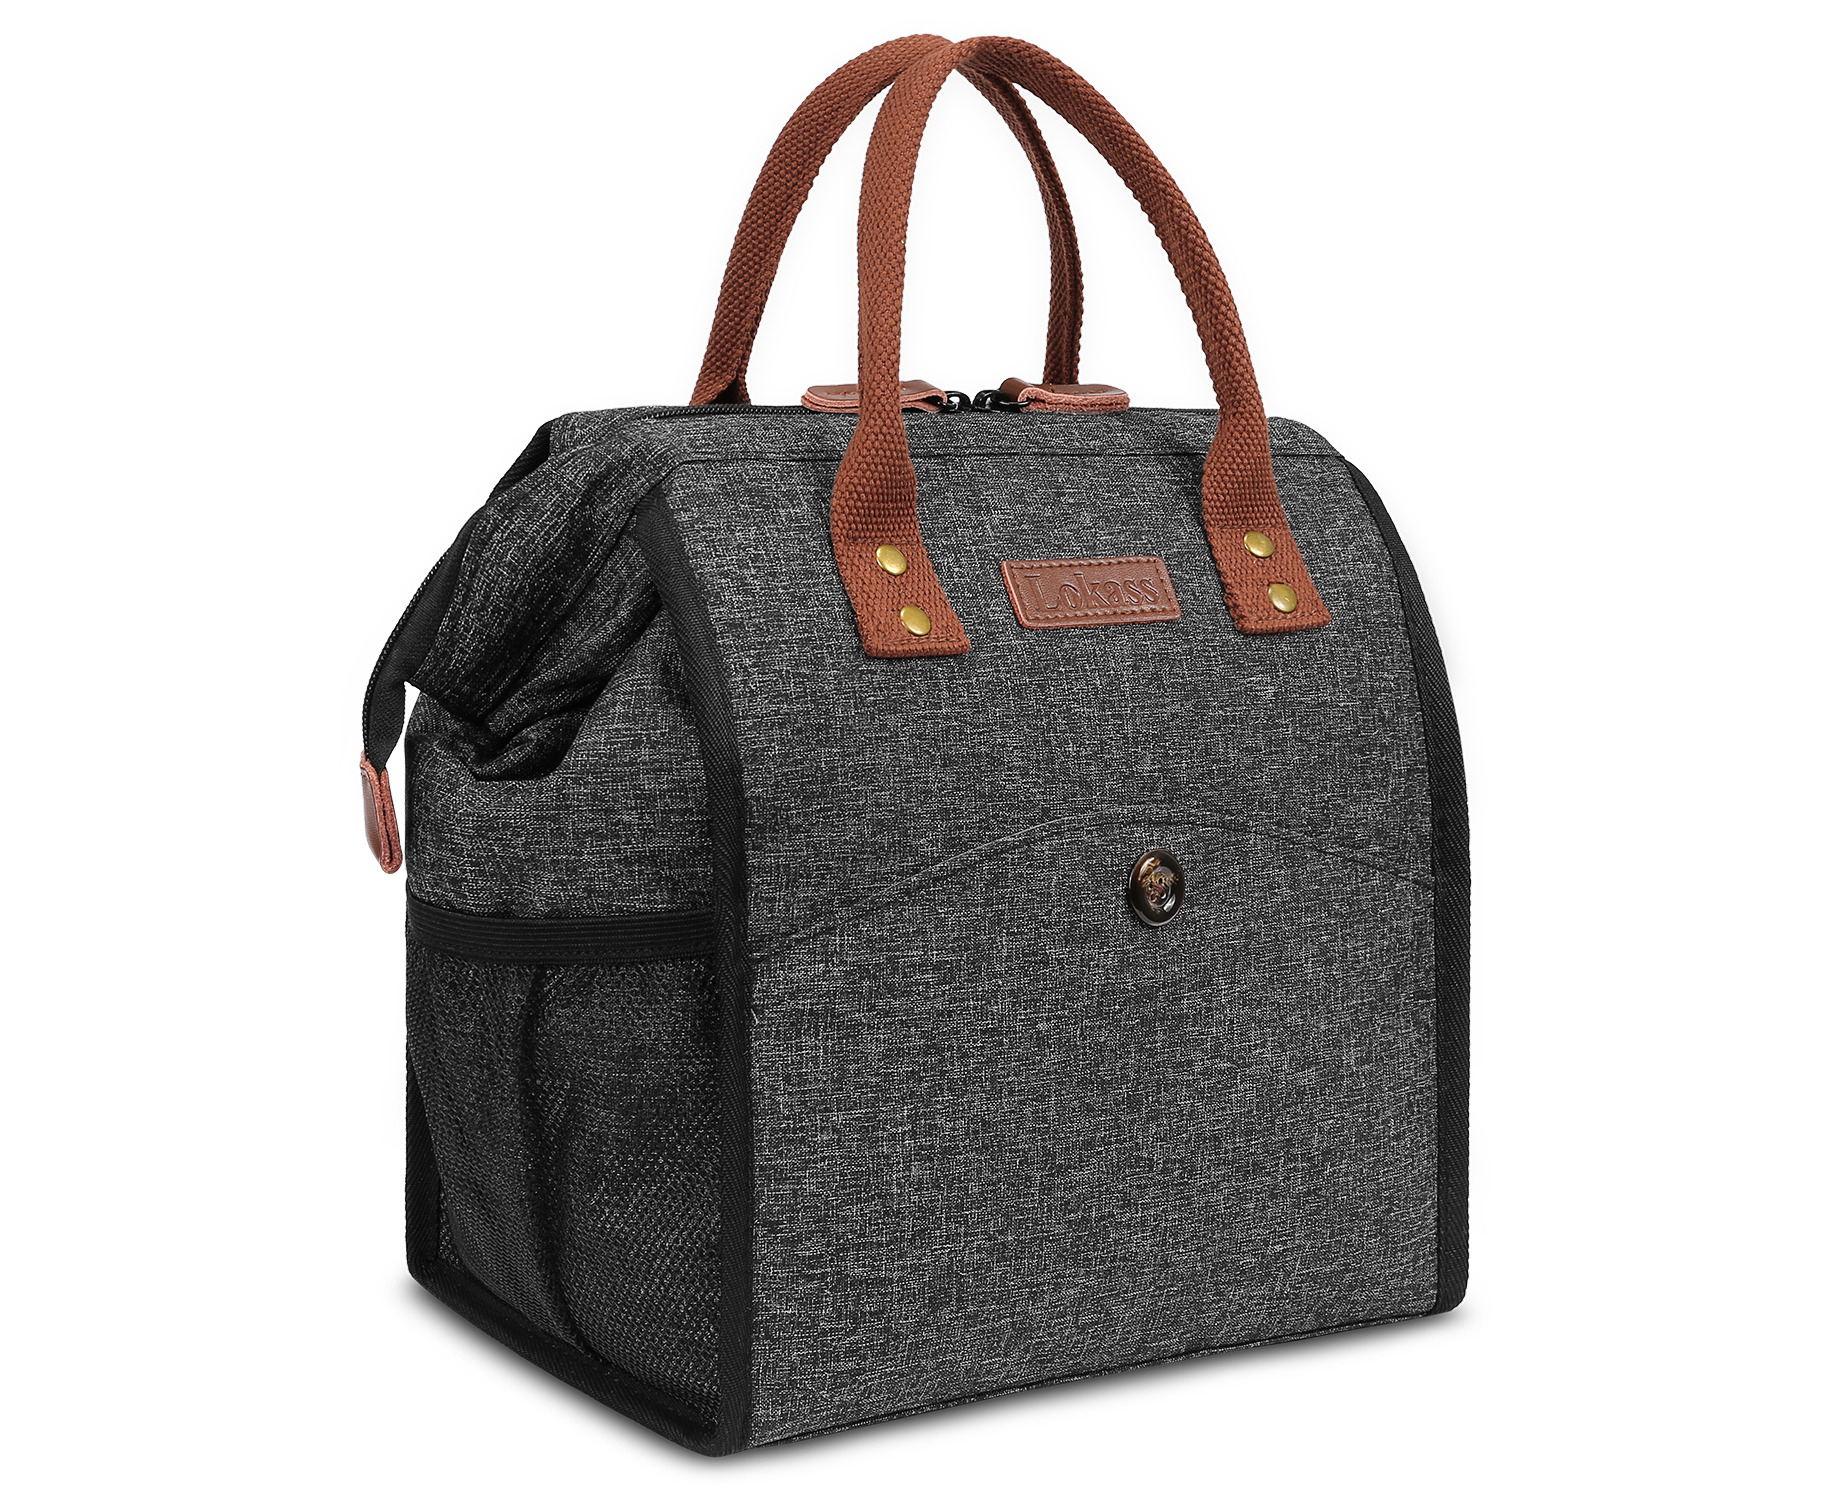 LOKASS Lunch Bags For Women Lunch Tote Bag | Catch.com.au